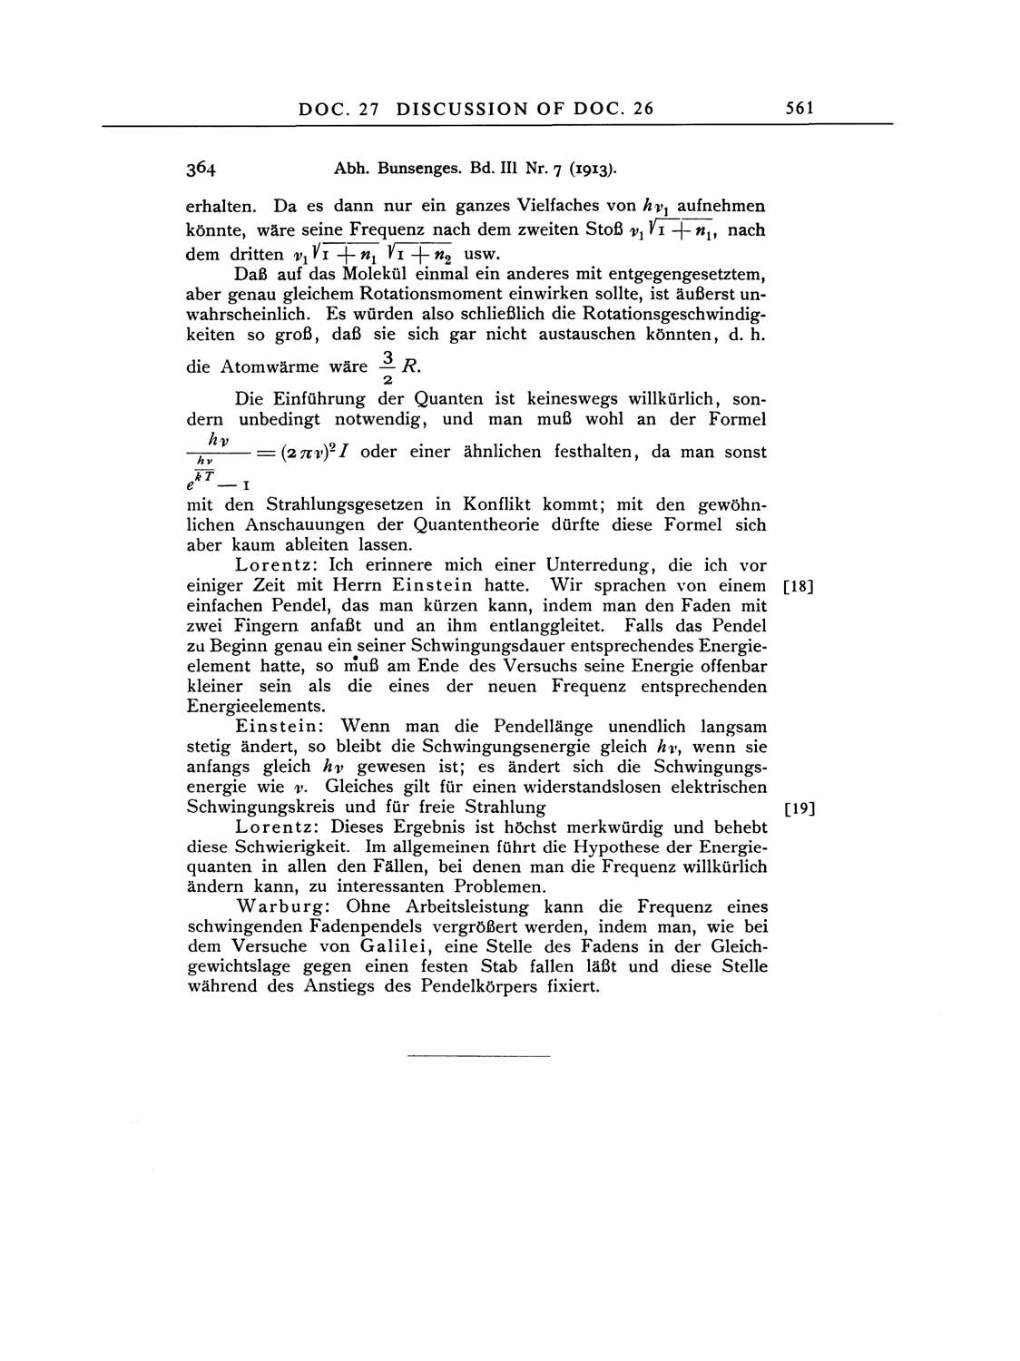 Volume 3: The Swiss Years: Writings 1909-1911 page 561